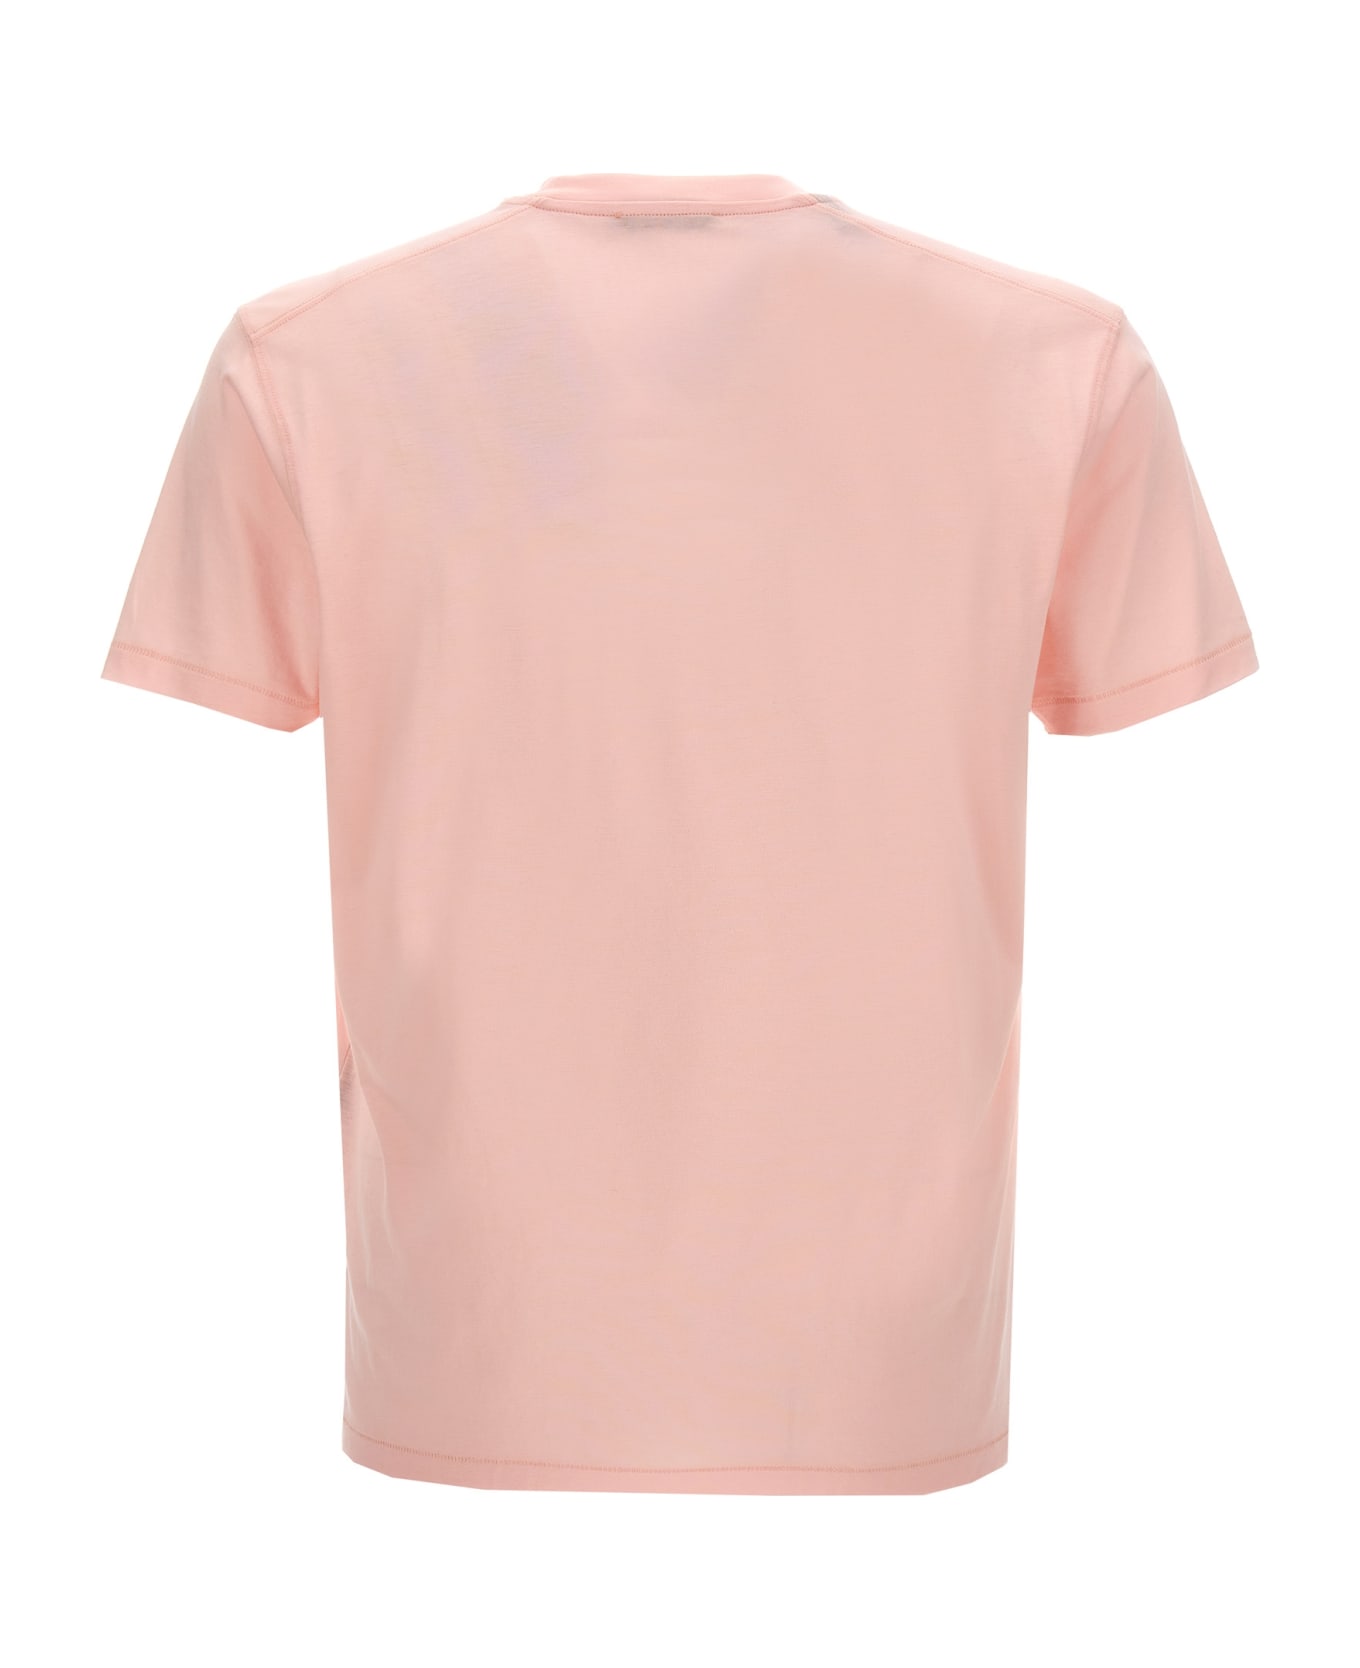 Tom Ford Lyoncell T-shirt - Pink シャツ